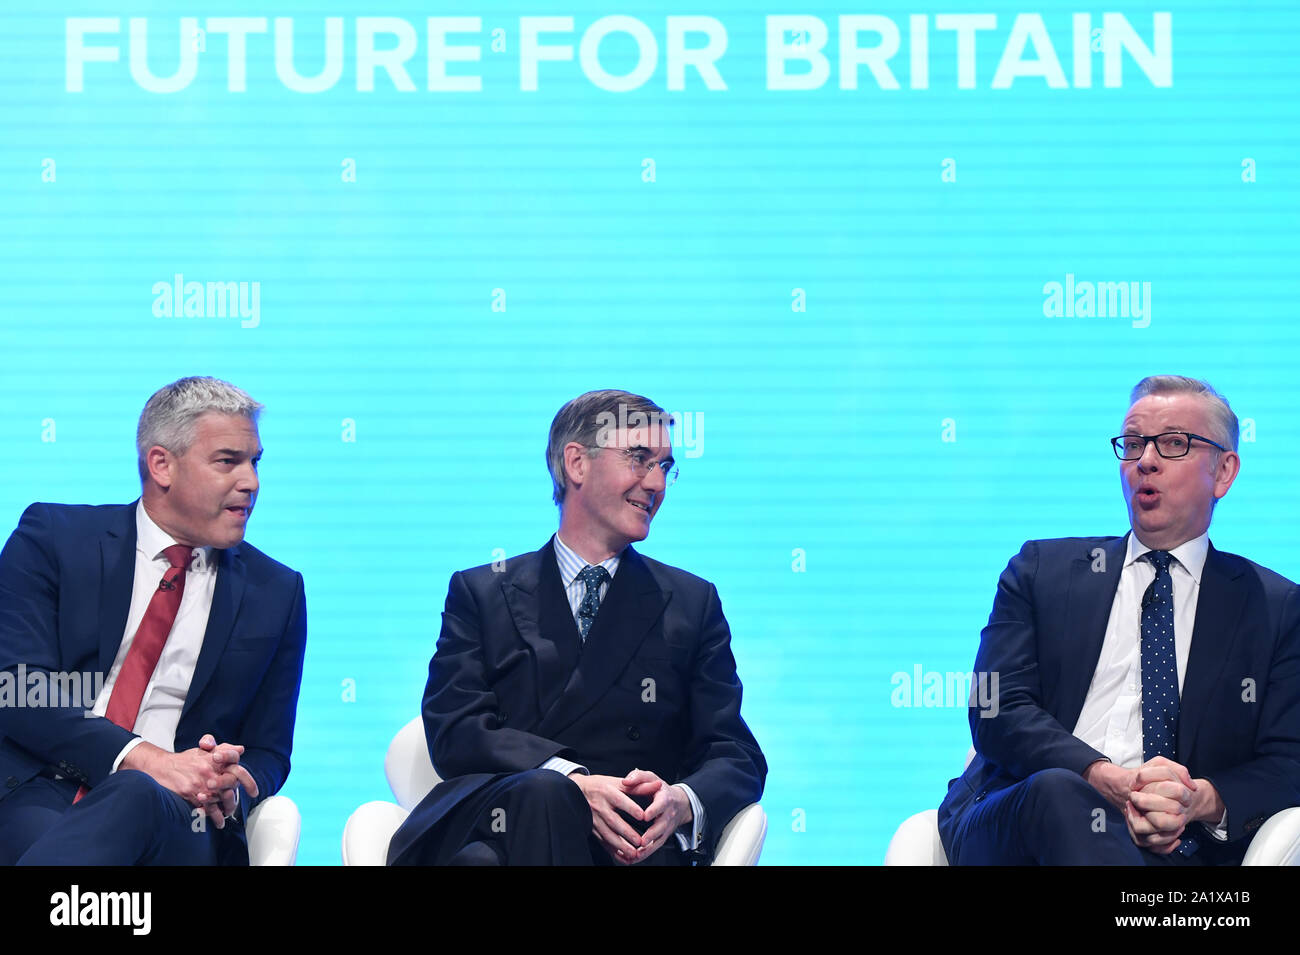 (left to right) Brexit Secretary Stephen Barclay, Leader of the House of Commons Jacob Rees-Mogg and Chancellor of the Duchy of Lancaster Michael Gove on stage at the Conservative Party Conference being held at the Manchester Convention Centre. Stock Photo